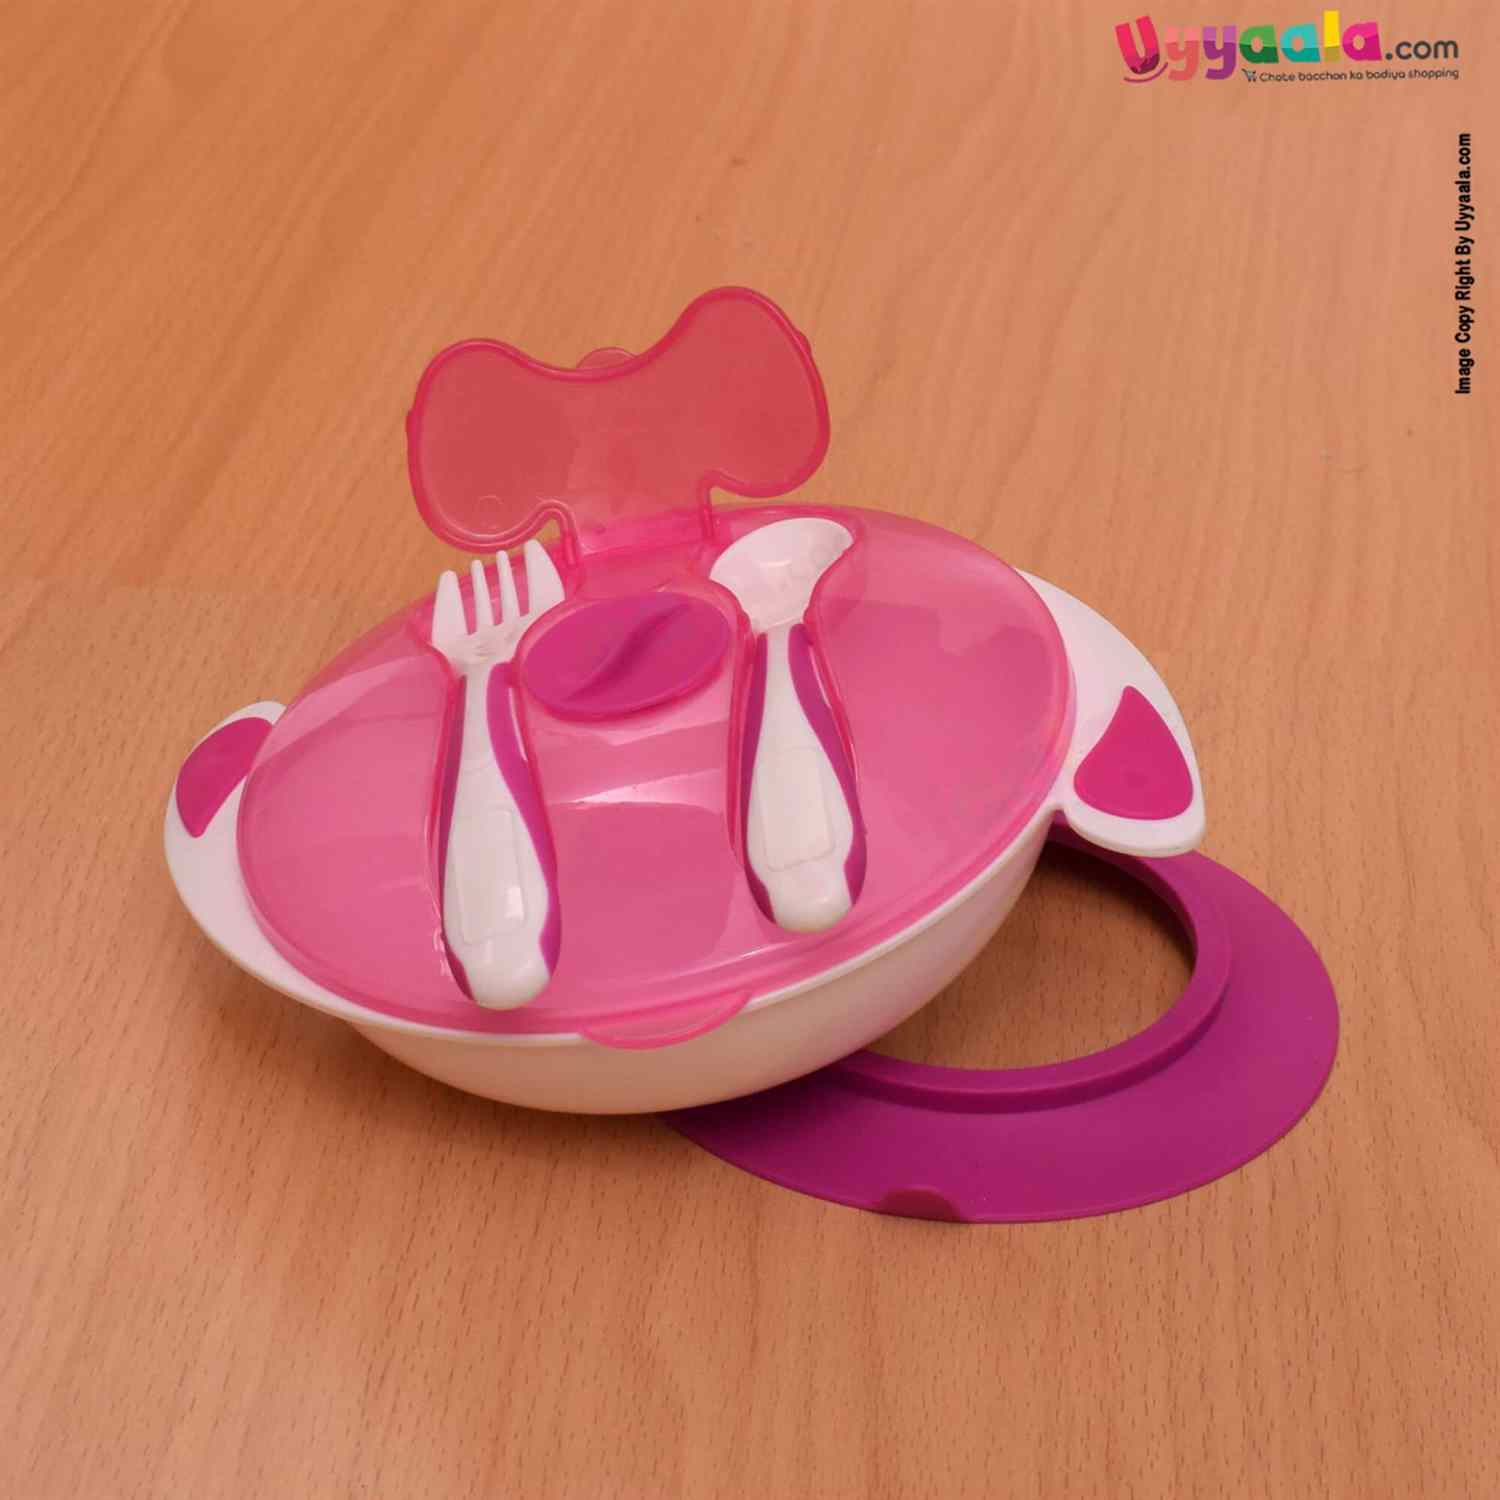 MUMLOVE Baby Suction Bowl & Spoons 10+m Age, Pink